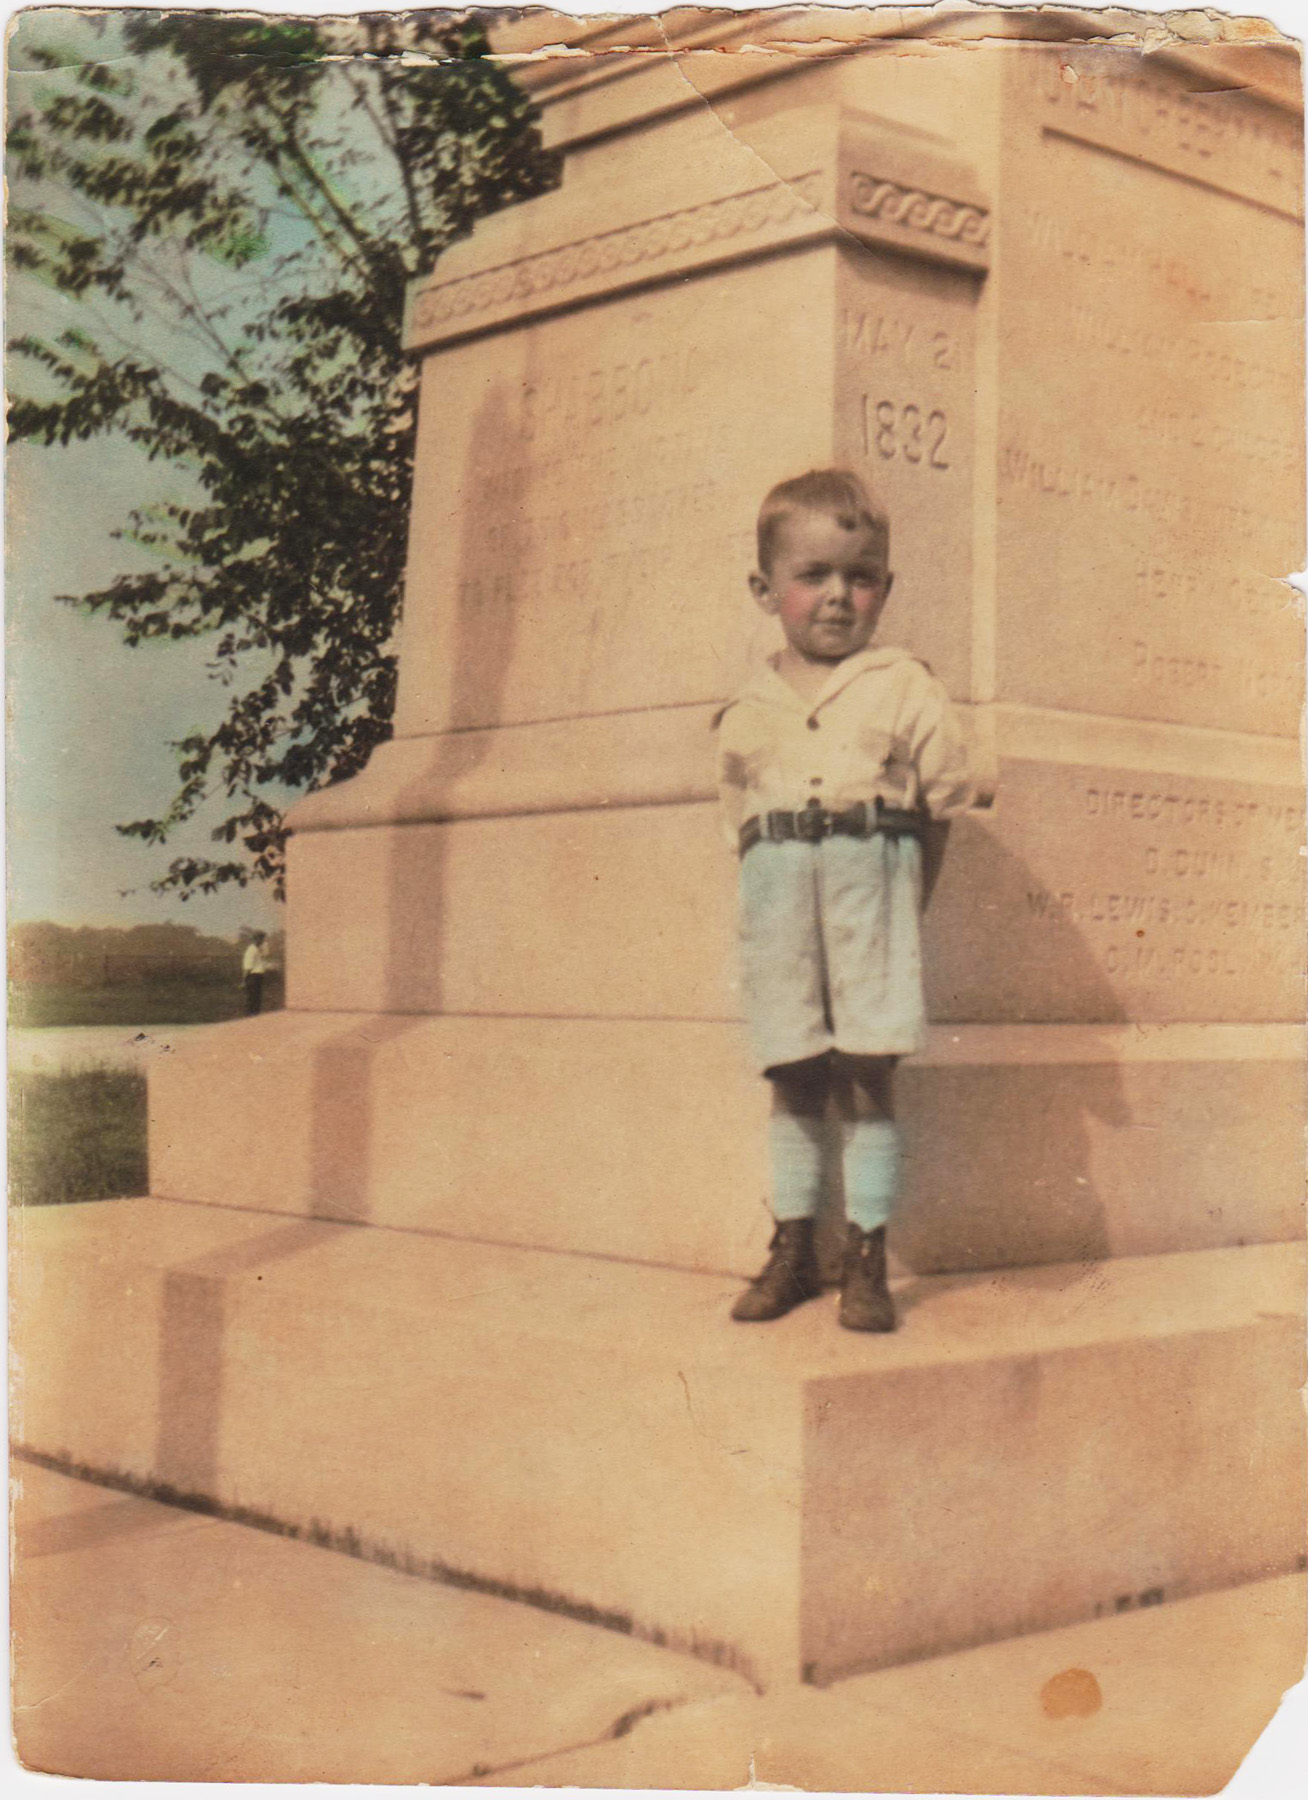 This is a studio tinted photo of my Dad, Gordon H. Clevenger, taken in Mokena, Illinois, sometime around 1927. He was around 3 years old. View full size.